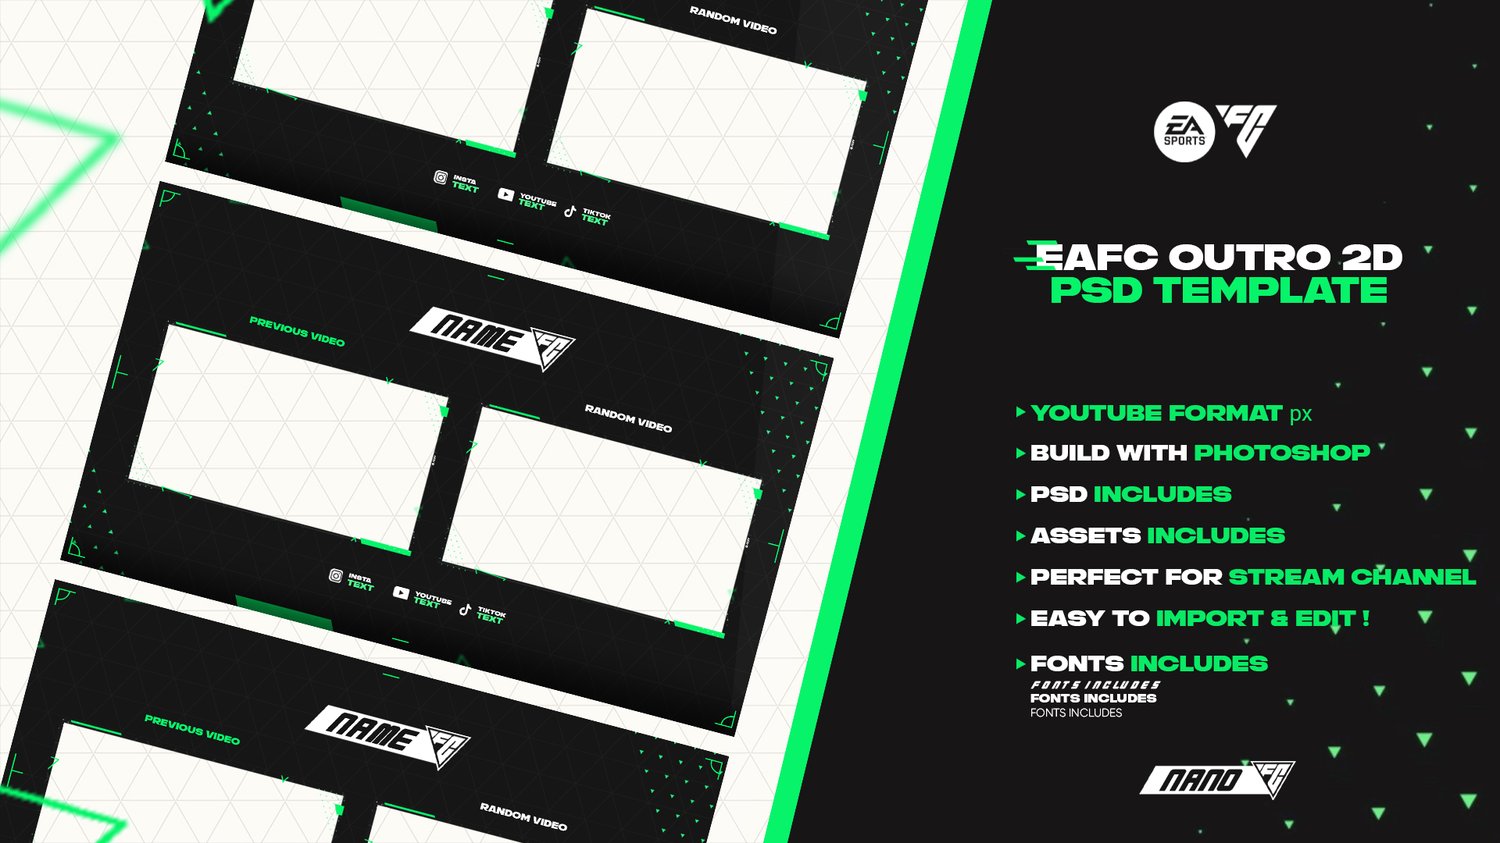 EAFC 24 Animated Livestream Overlay and Branding Pack (FIFA 24